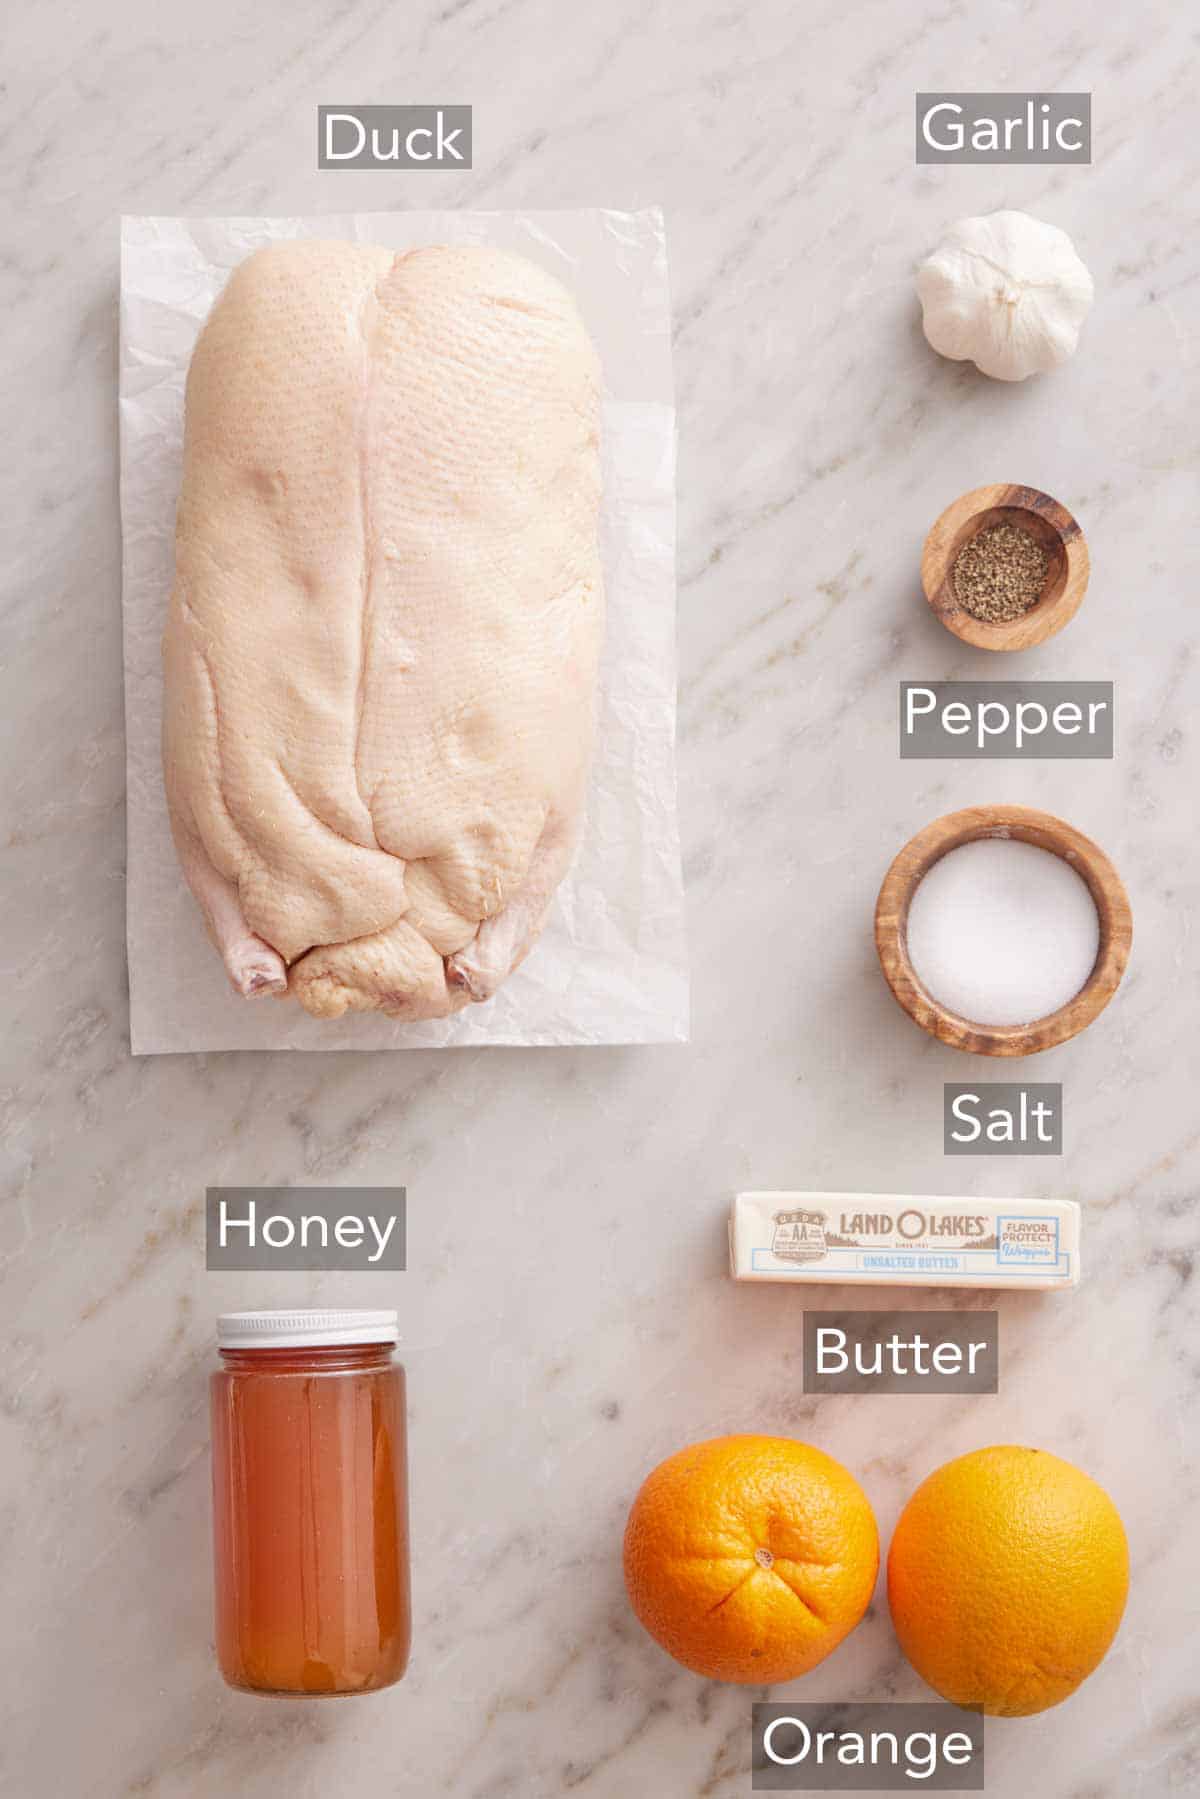 Ingredients needed to make roasted duck.